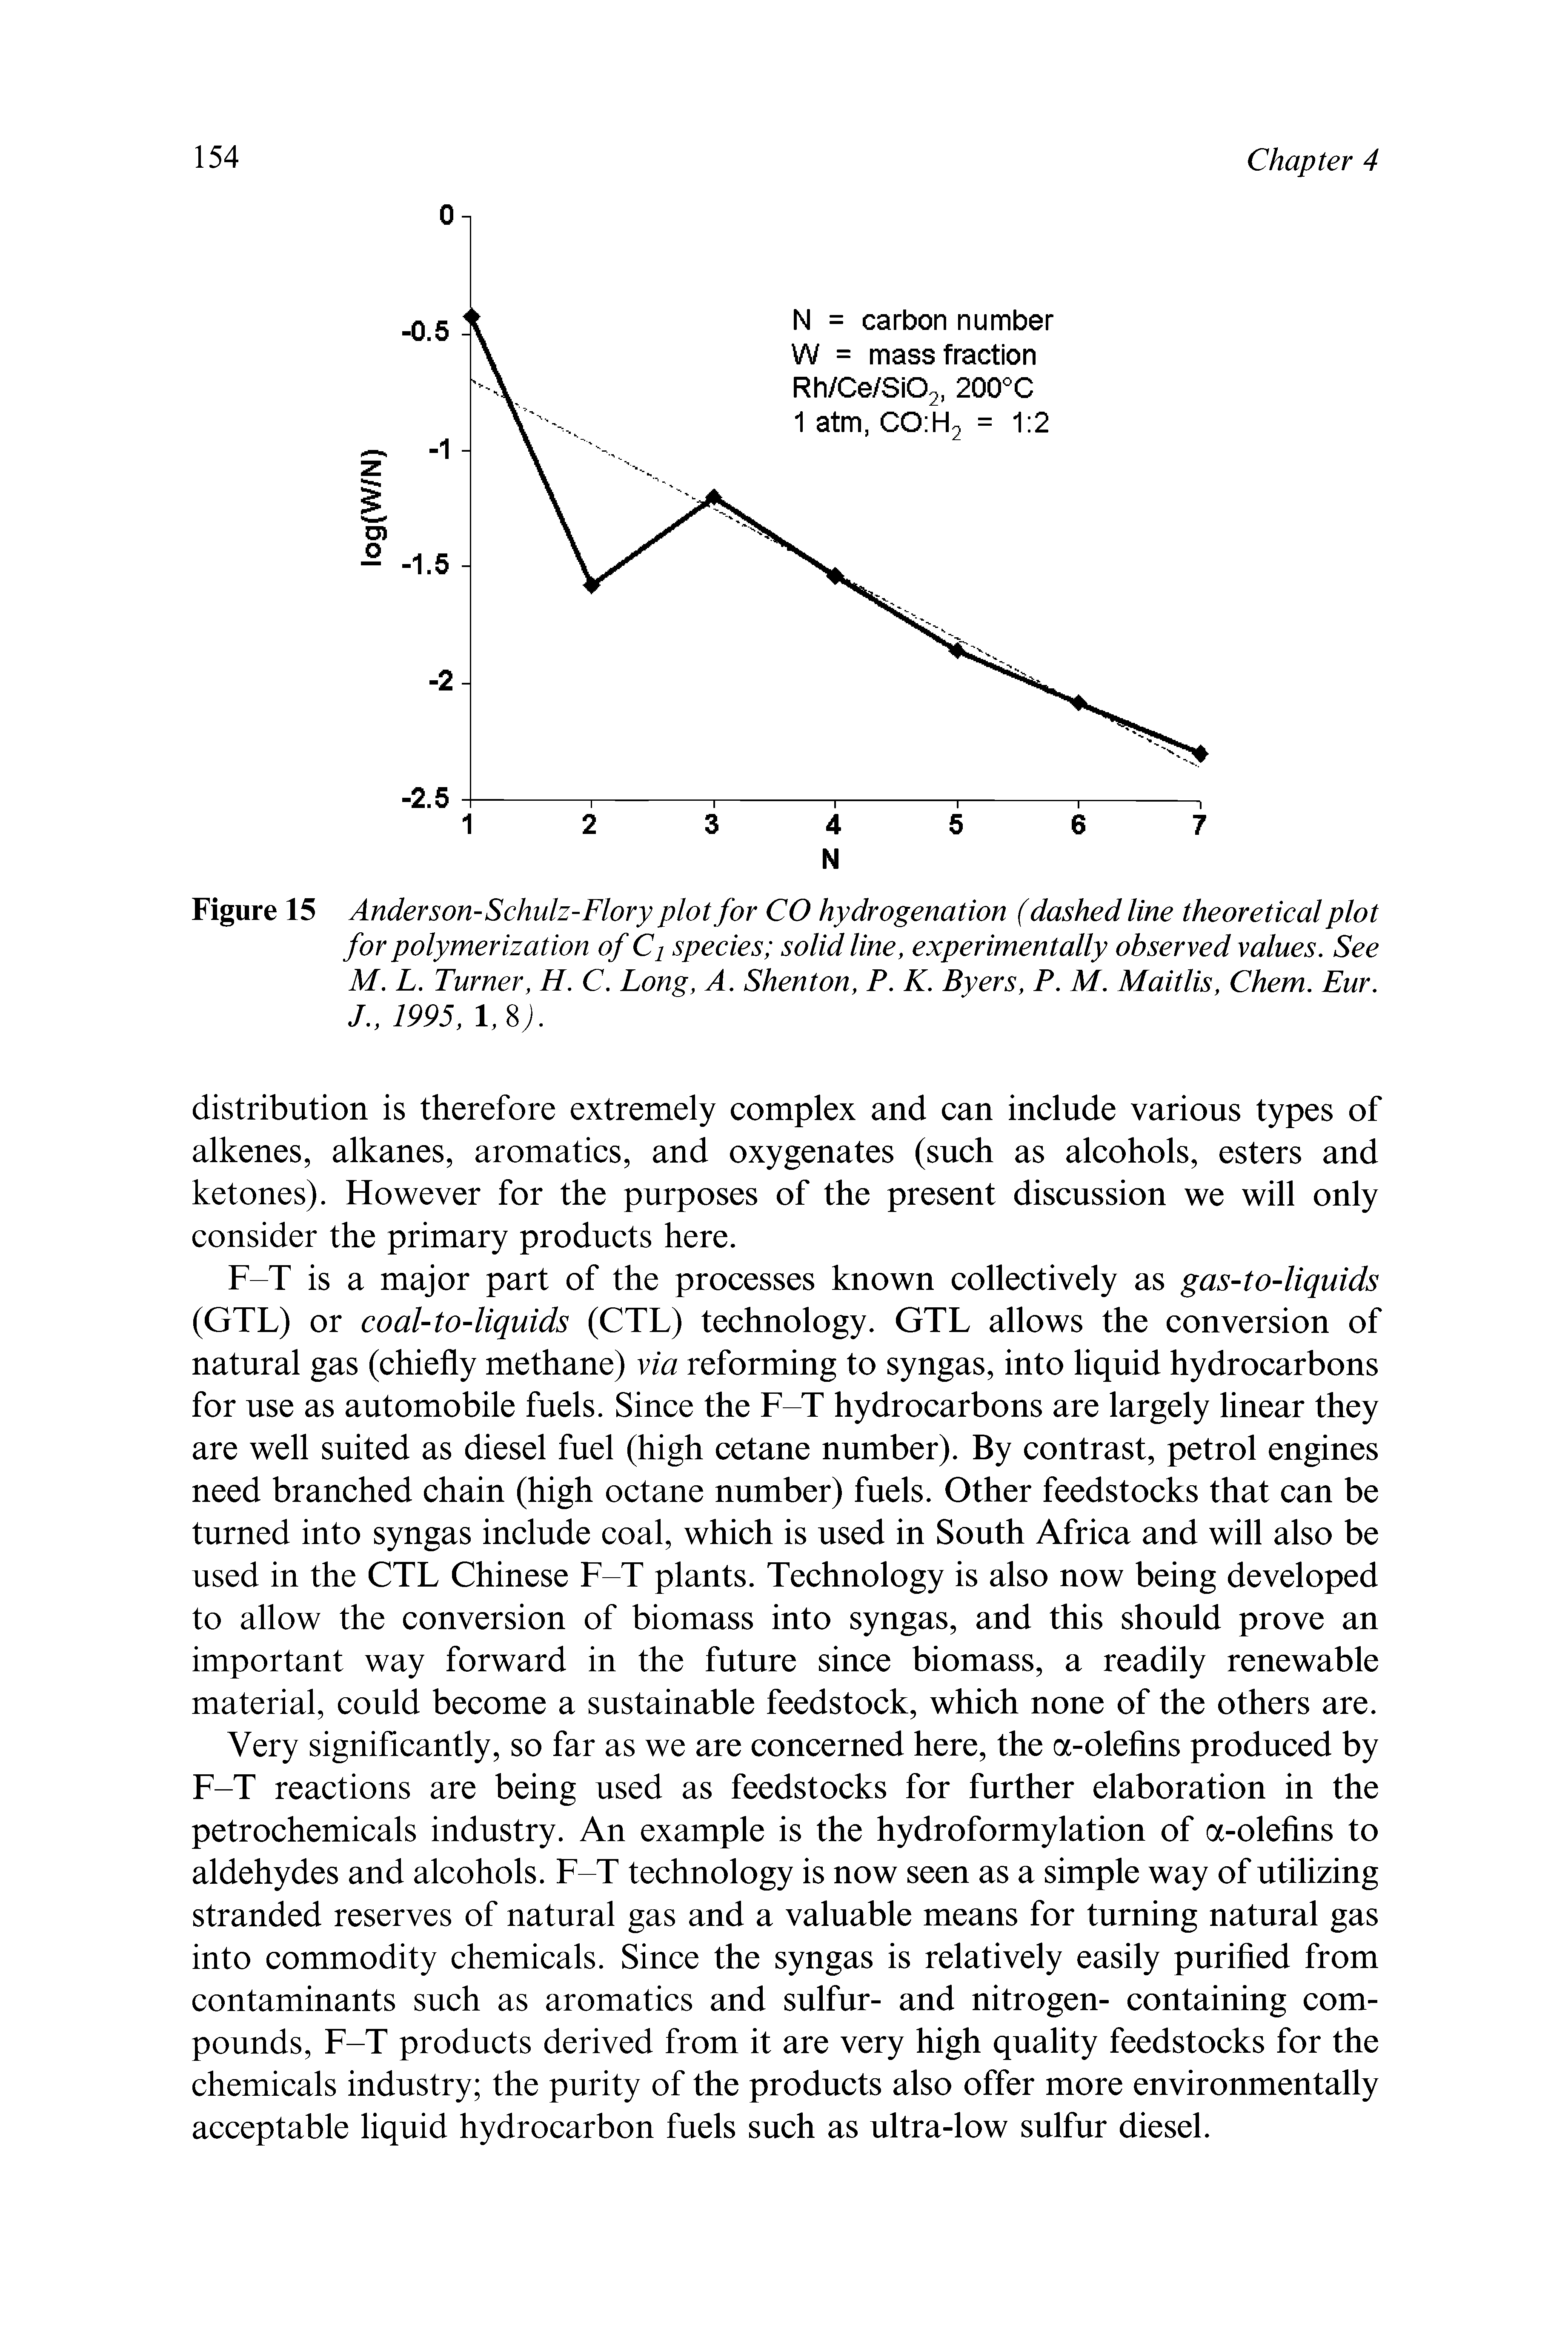 Figure 15 Anderson-Schulz-Flory plot for CO hydrogenation (dashed line theoretical plot for polymerization of Cj species solid line, experimentally observed values. See M. L. Turner, H. C. Long, A. Shenton, P. K. Byers, P. M. Maitlis, Chem. Eur. J., 1995, l,8j.